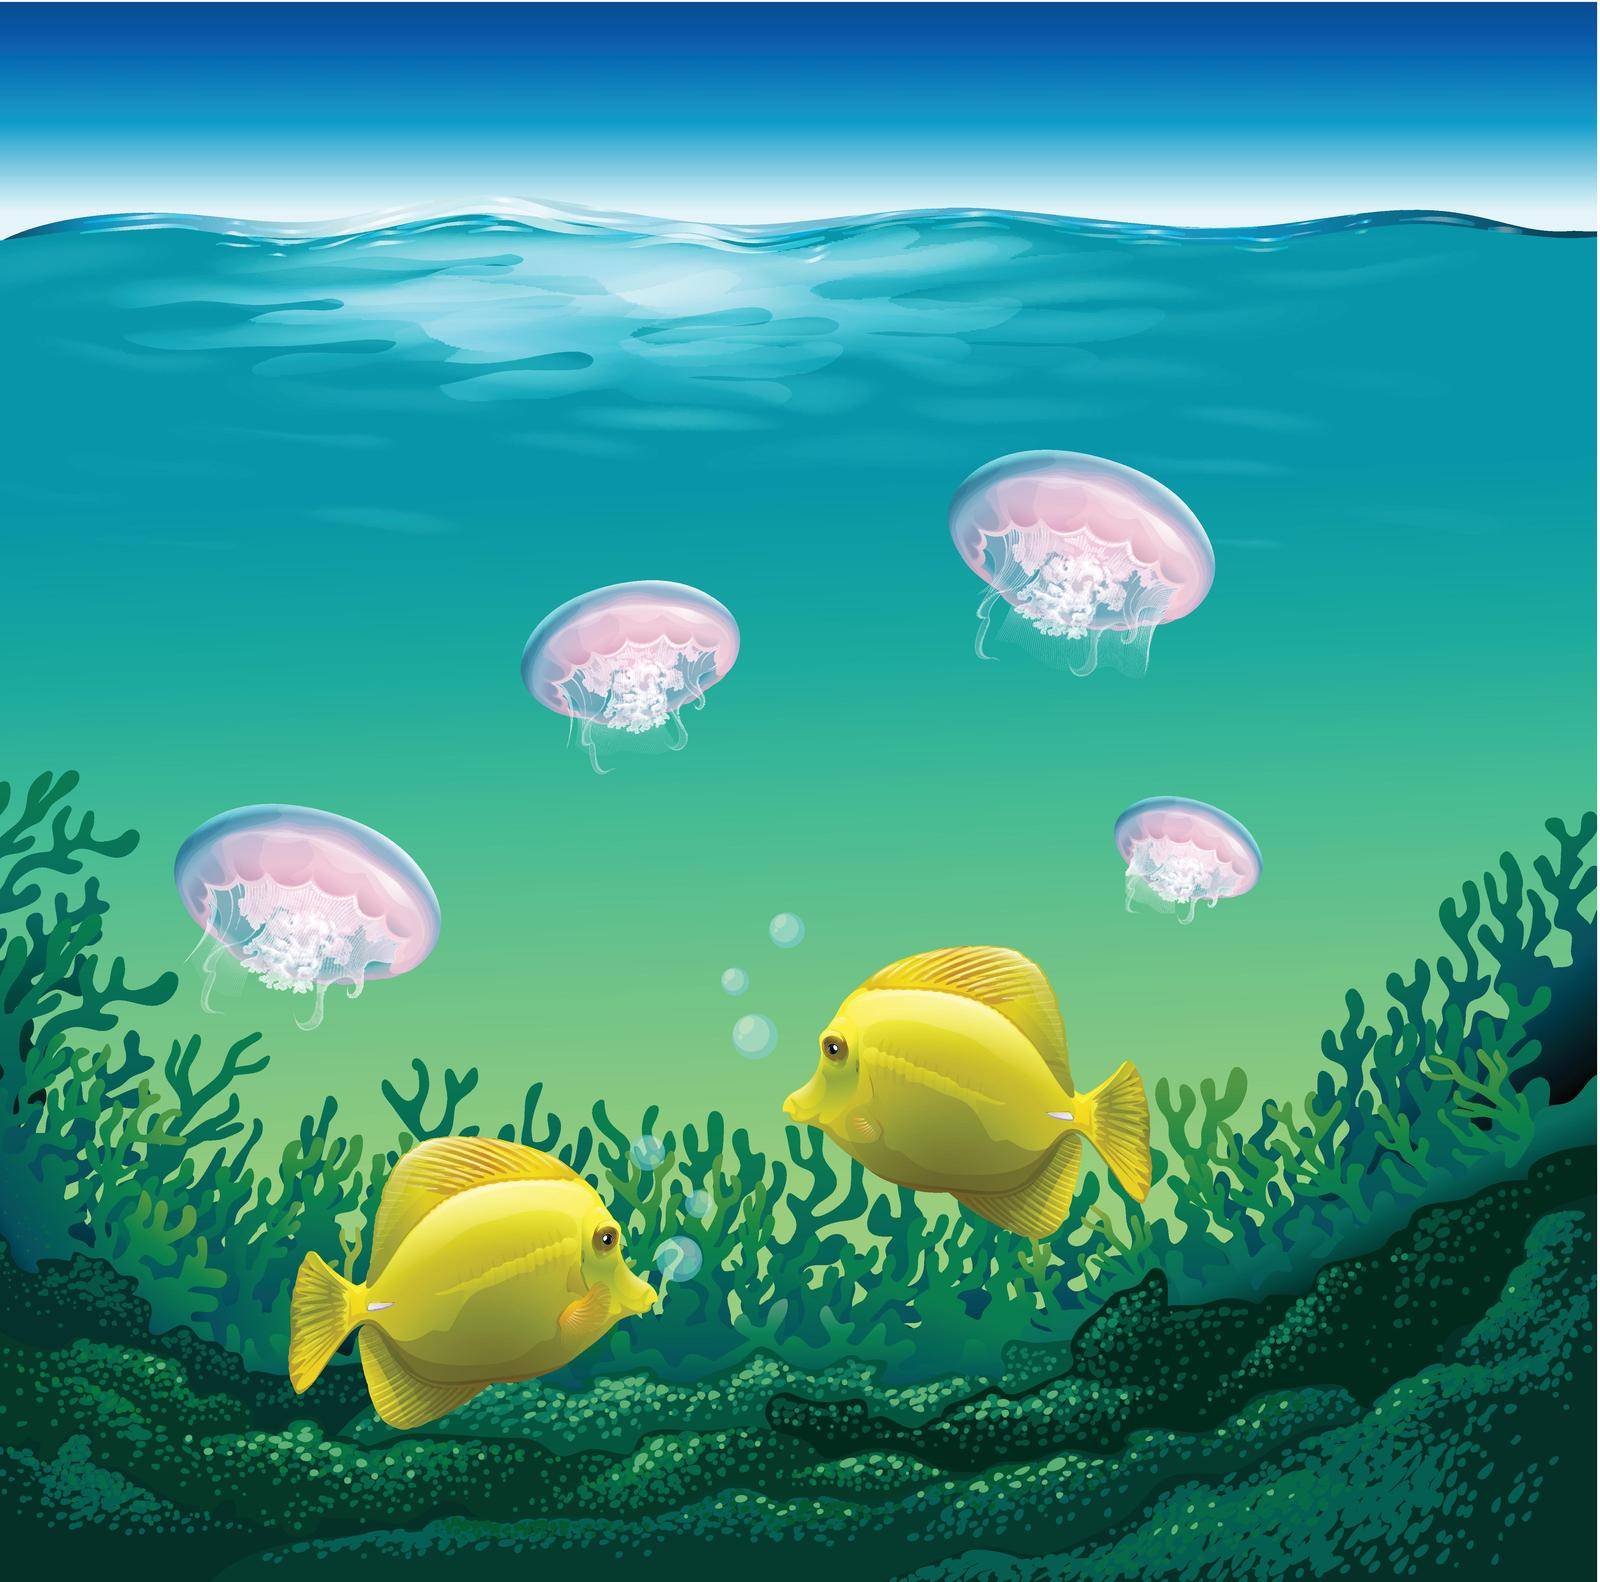 Ocean fish and jelly fish under the water